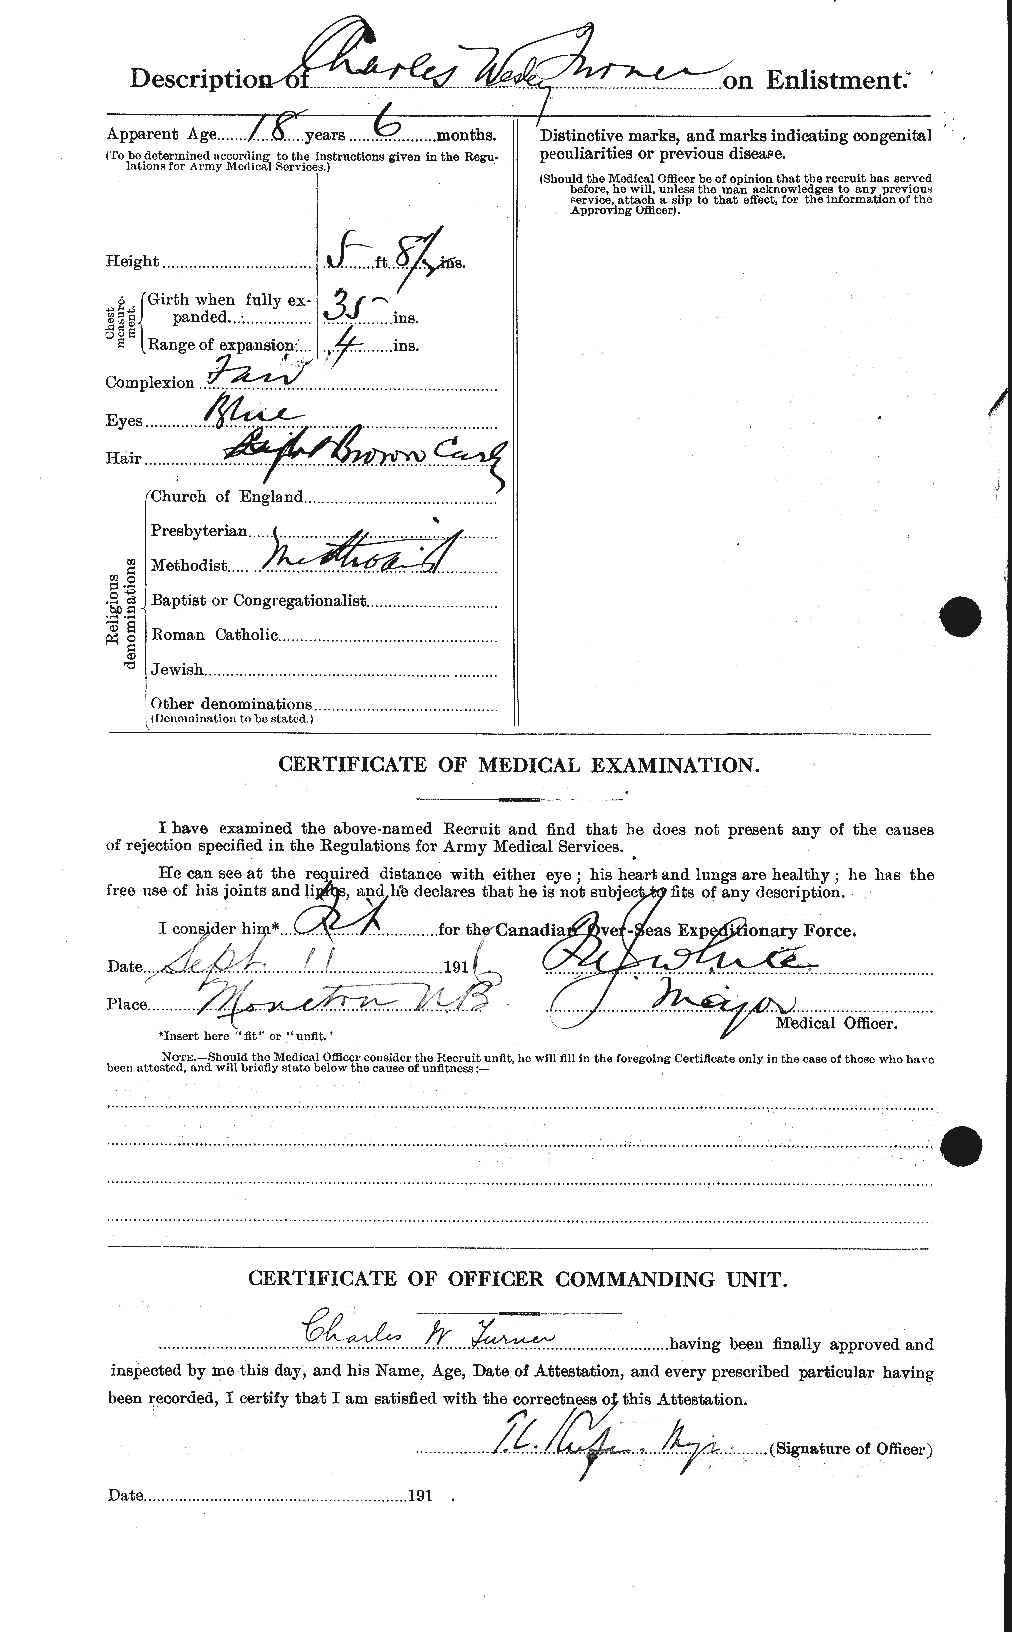 Personnel Records of the First World War - CEF 646385b